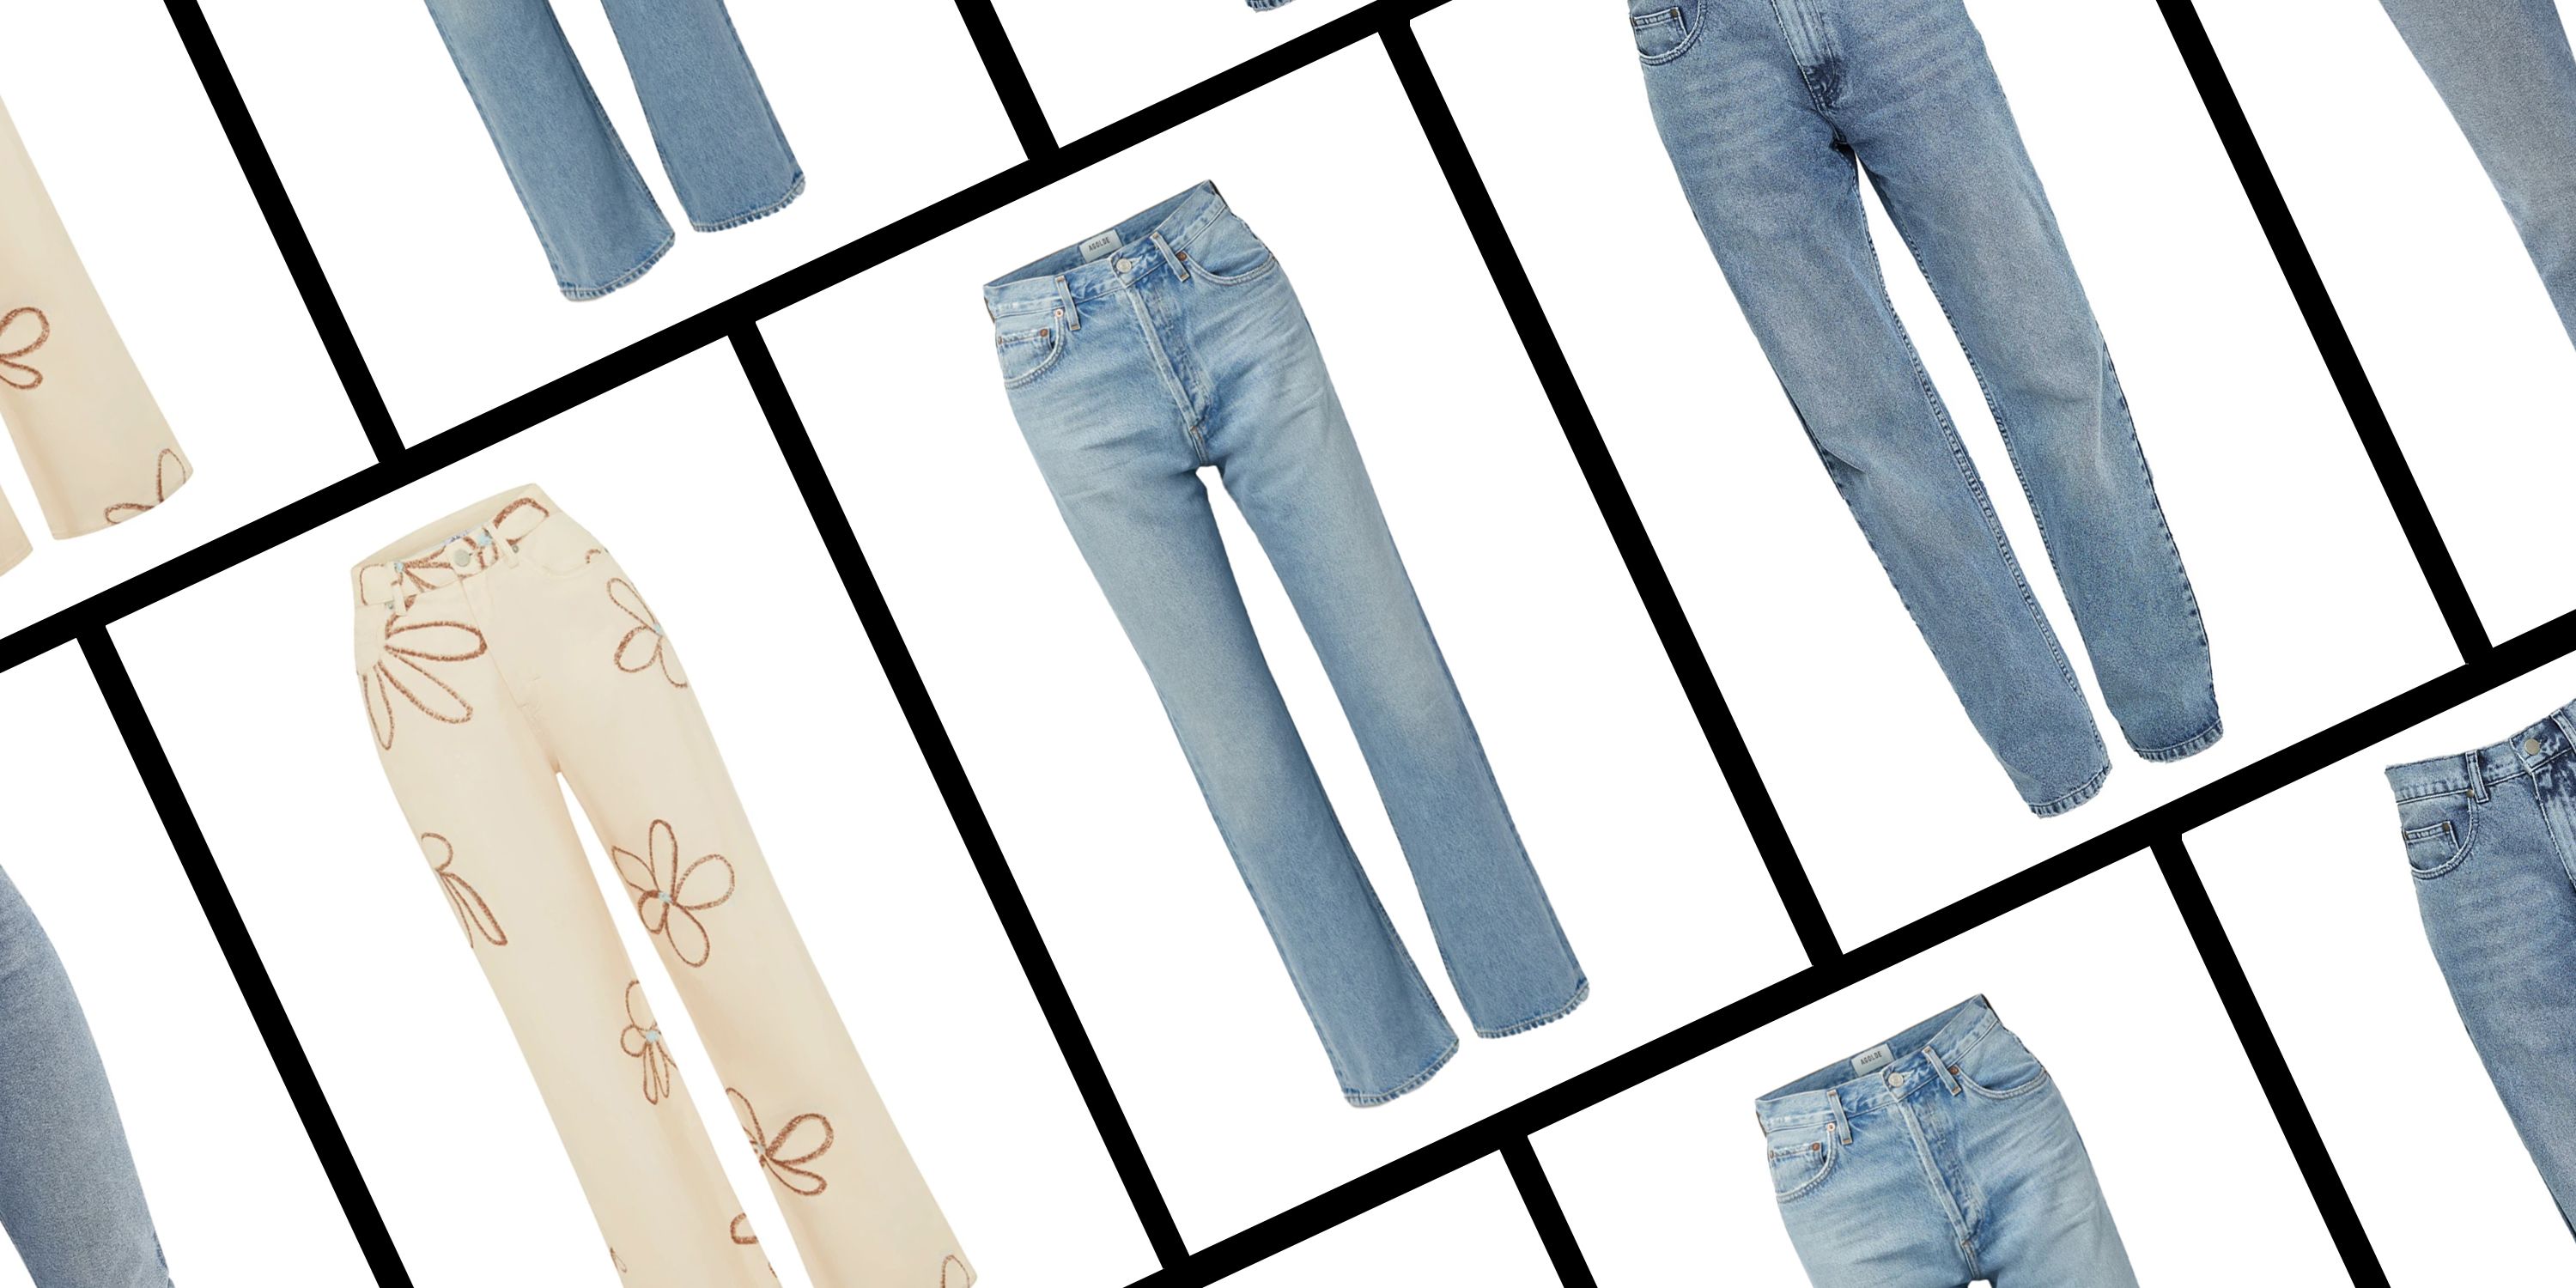 The Best Everyday Jeans According to Denim Designers